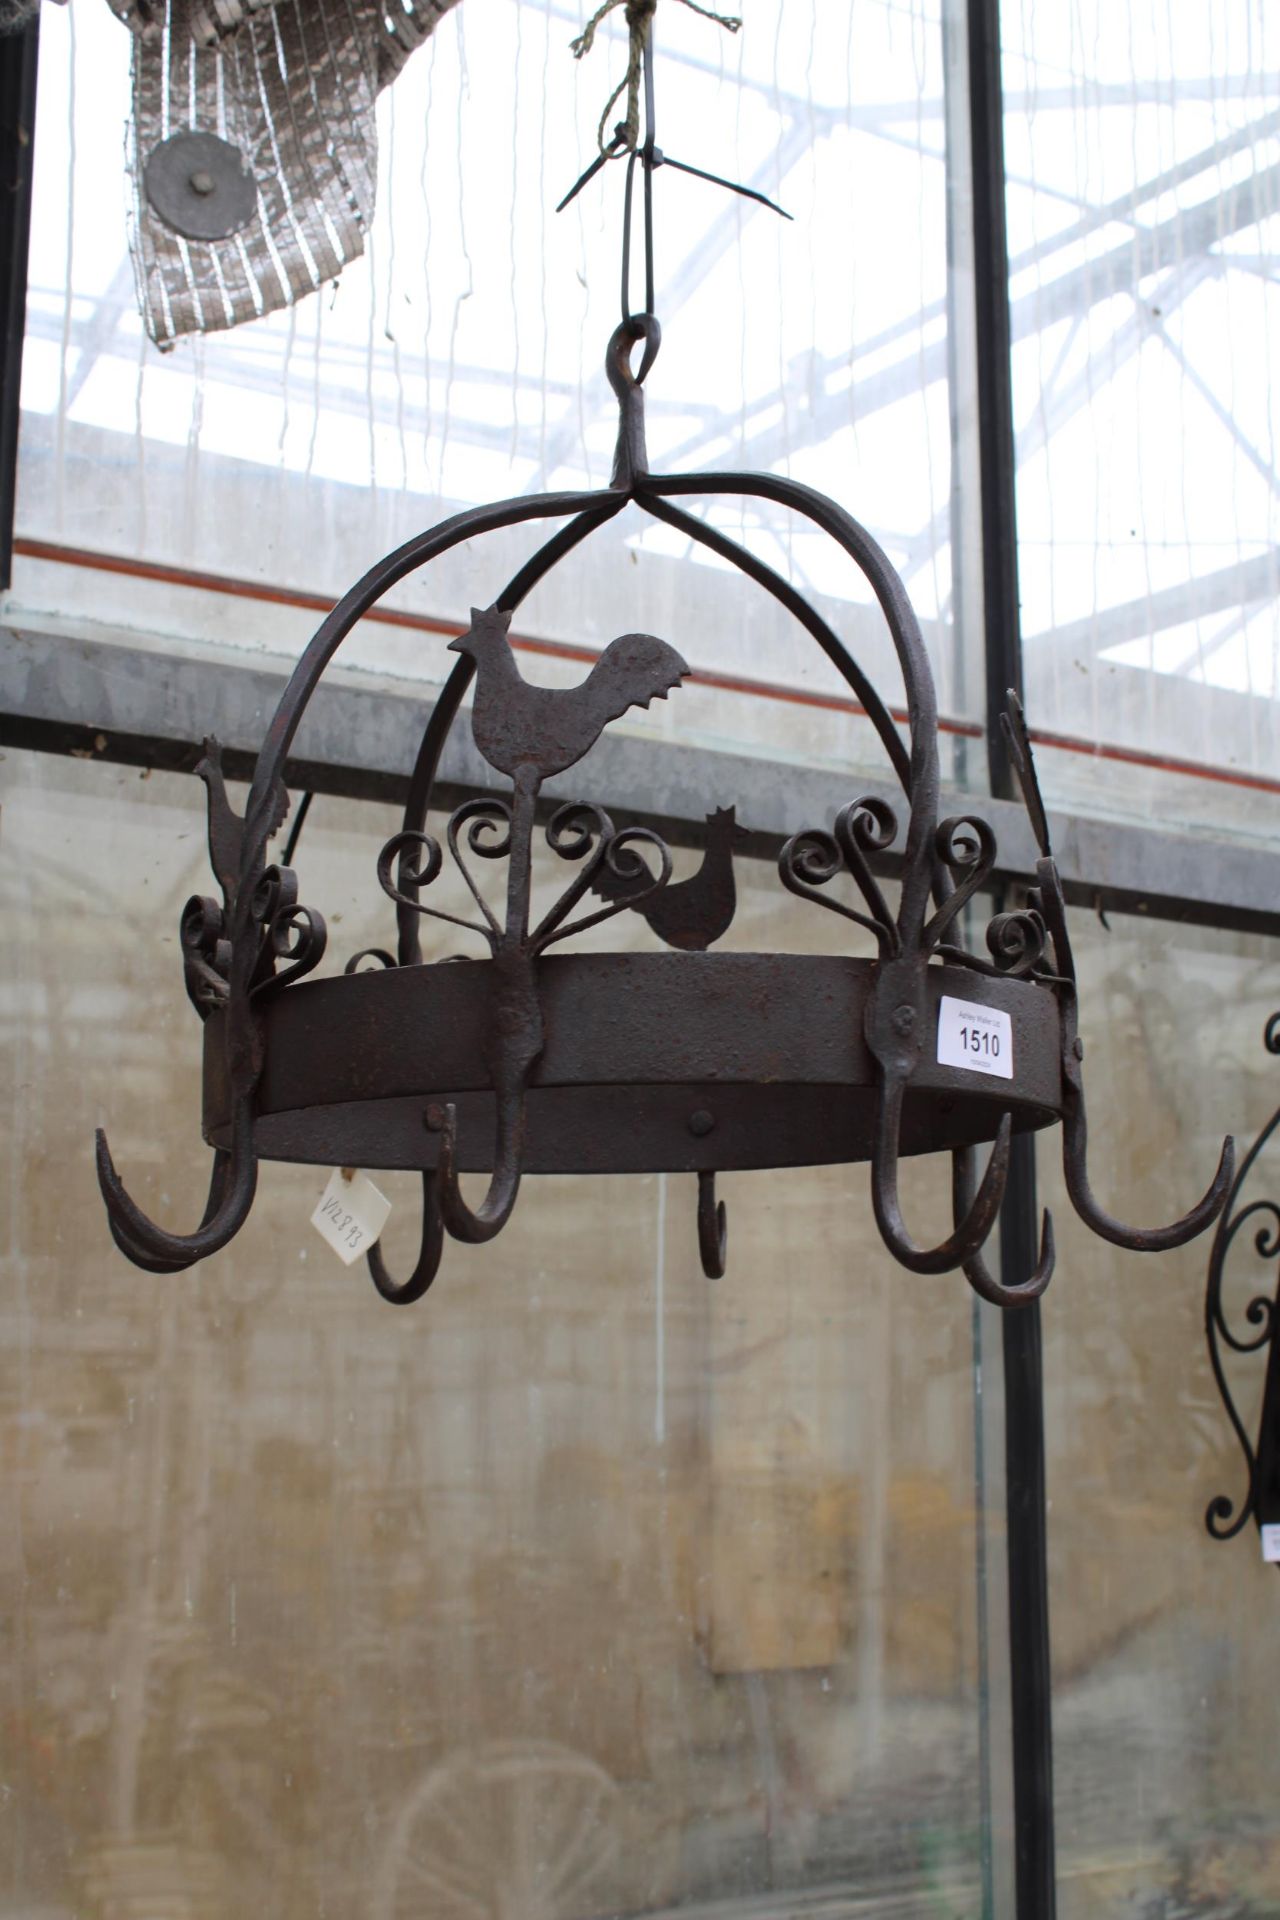 A VINTAGE AND DECORATIVE PAN HANGING RACK DEPICTING CHICKENS